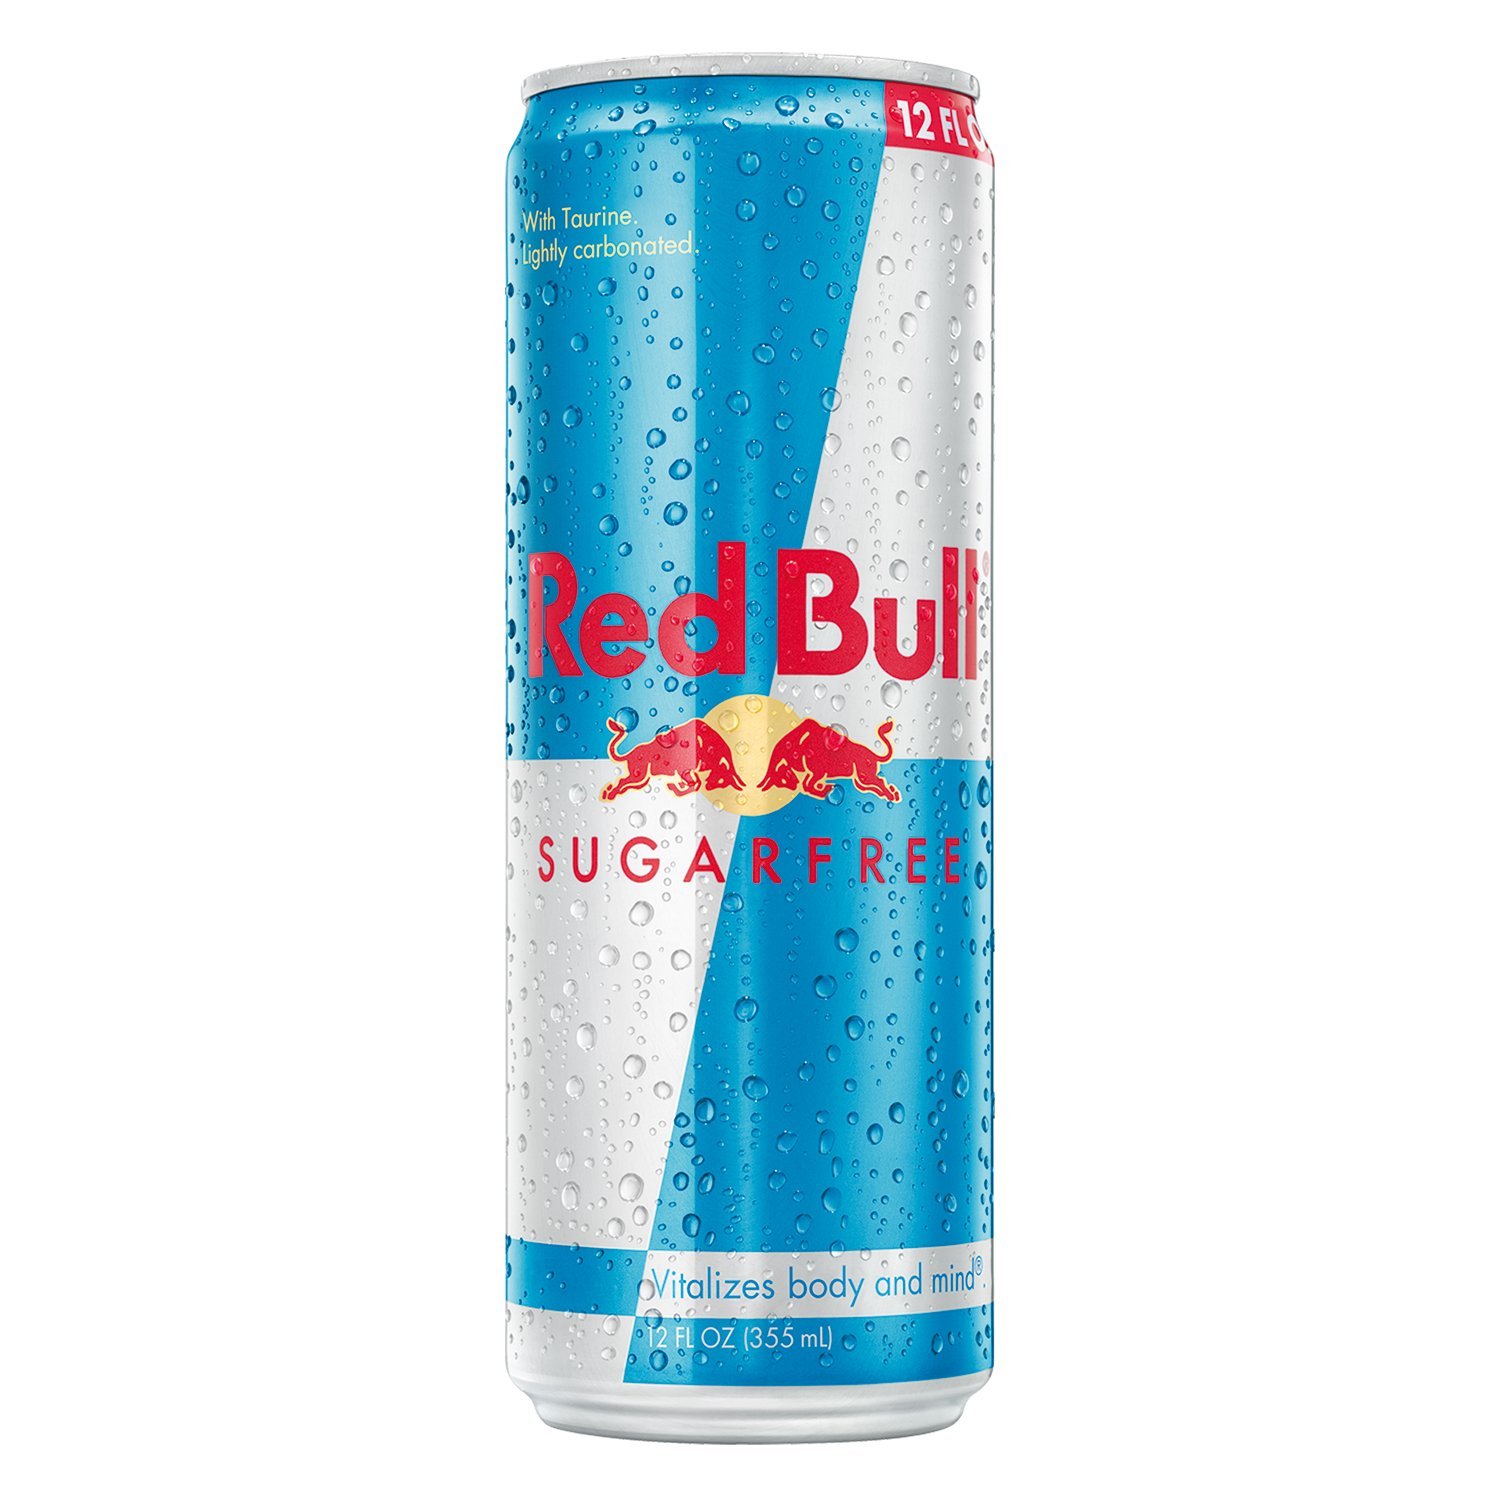 Amazon Pluspng.com: Red Bull Sugarfree, Energy Drink, 12 Fl Oz Cans, 4 Pack: Prime Pantry - Red Bull, Transparent background PNG HD thumbnail